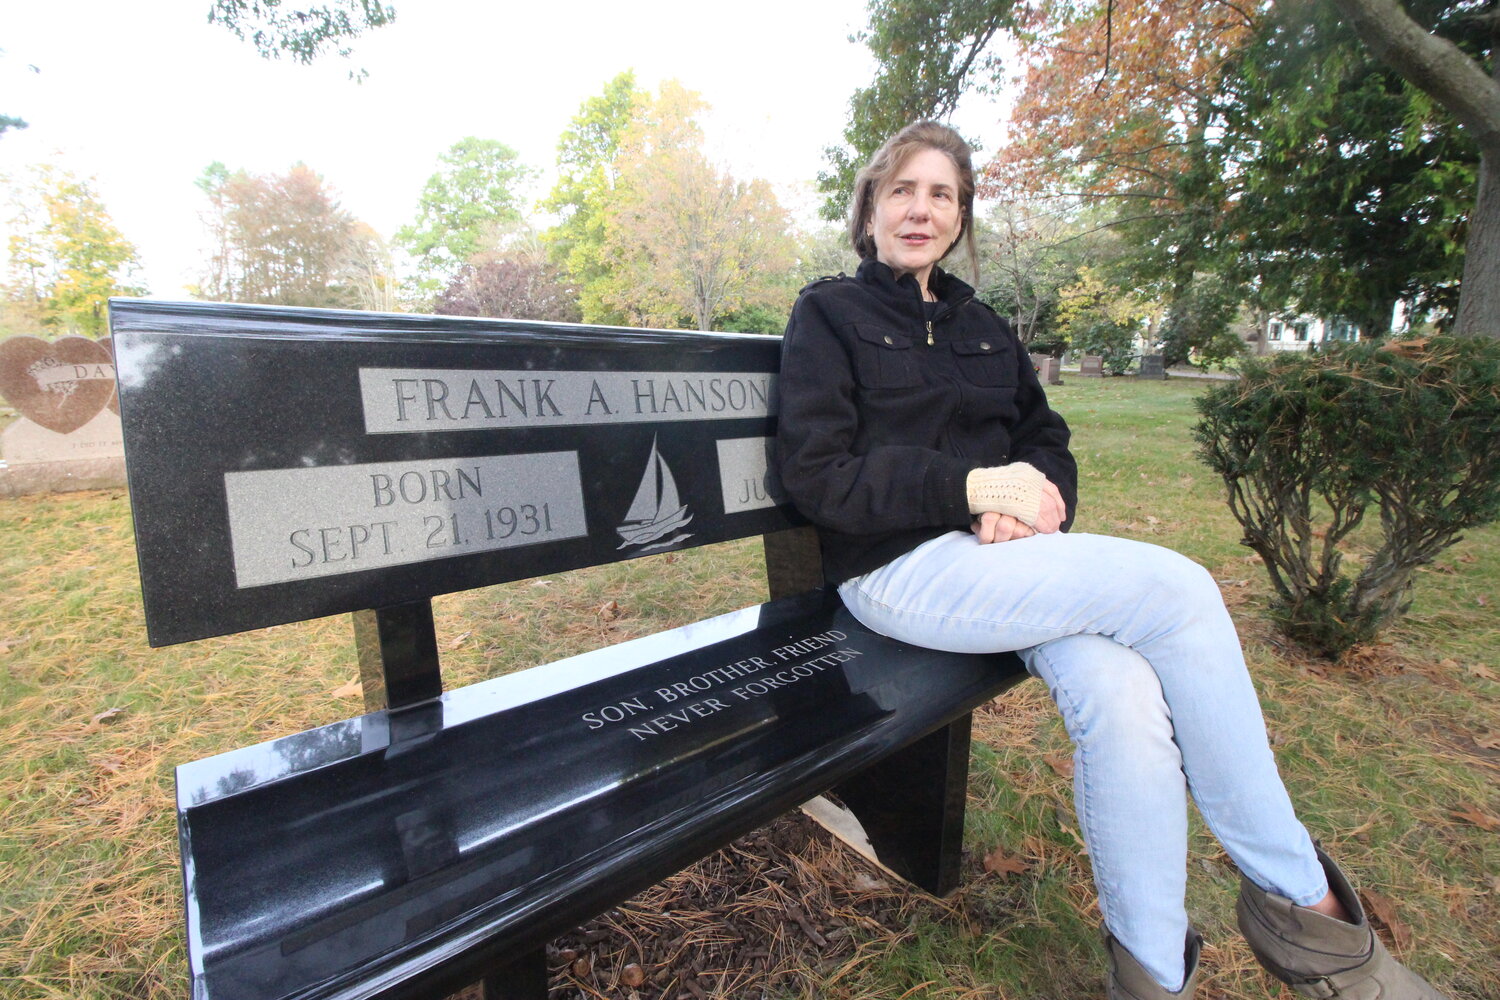 IN MEMORY OF FRANK HANSON JR.: Gloria Coppola who retired as a major crimes investigator from the  New York State Police (NYSP) Bureau of Criminal Investigation has hopes of finding remains of Frank Hanson who was last seen on July 12, 1947. She sits on a bench she bought and is across from the grave stone of Frank’s parents at Pawtuxet Memorial Cemetery in Warwick. (Cranston Herald photos)